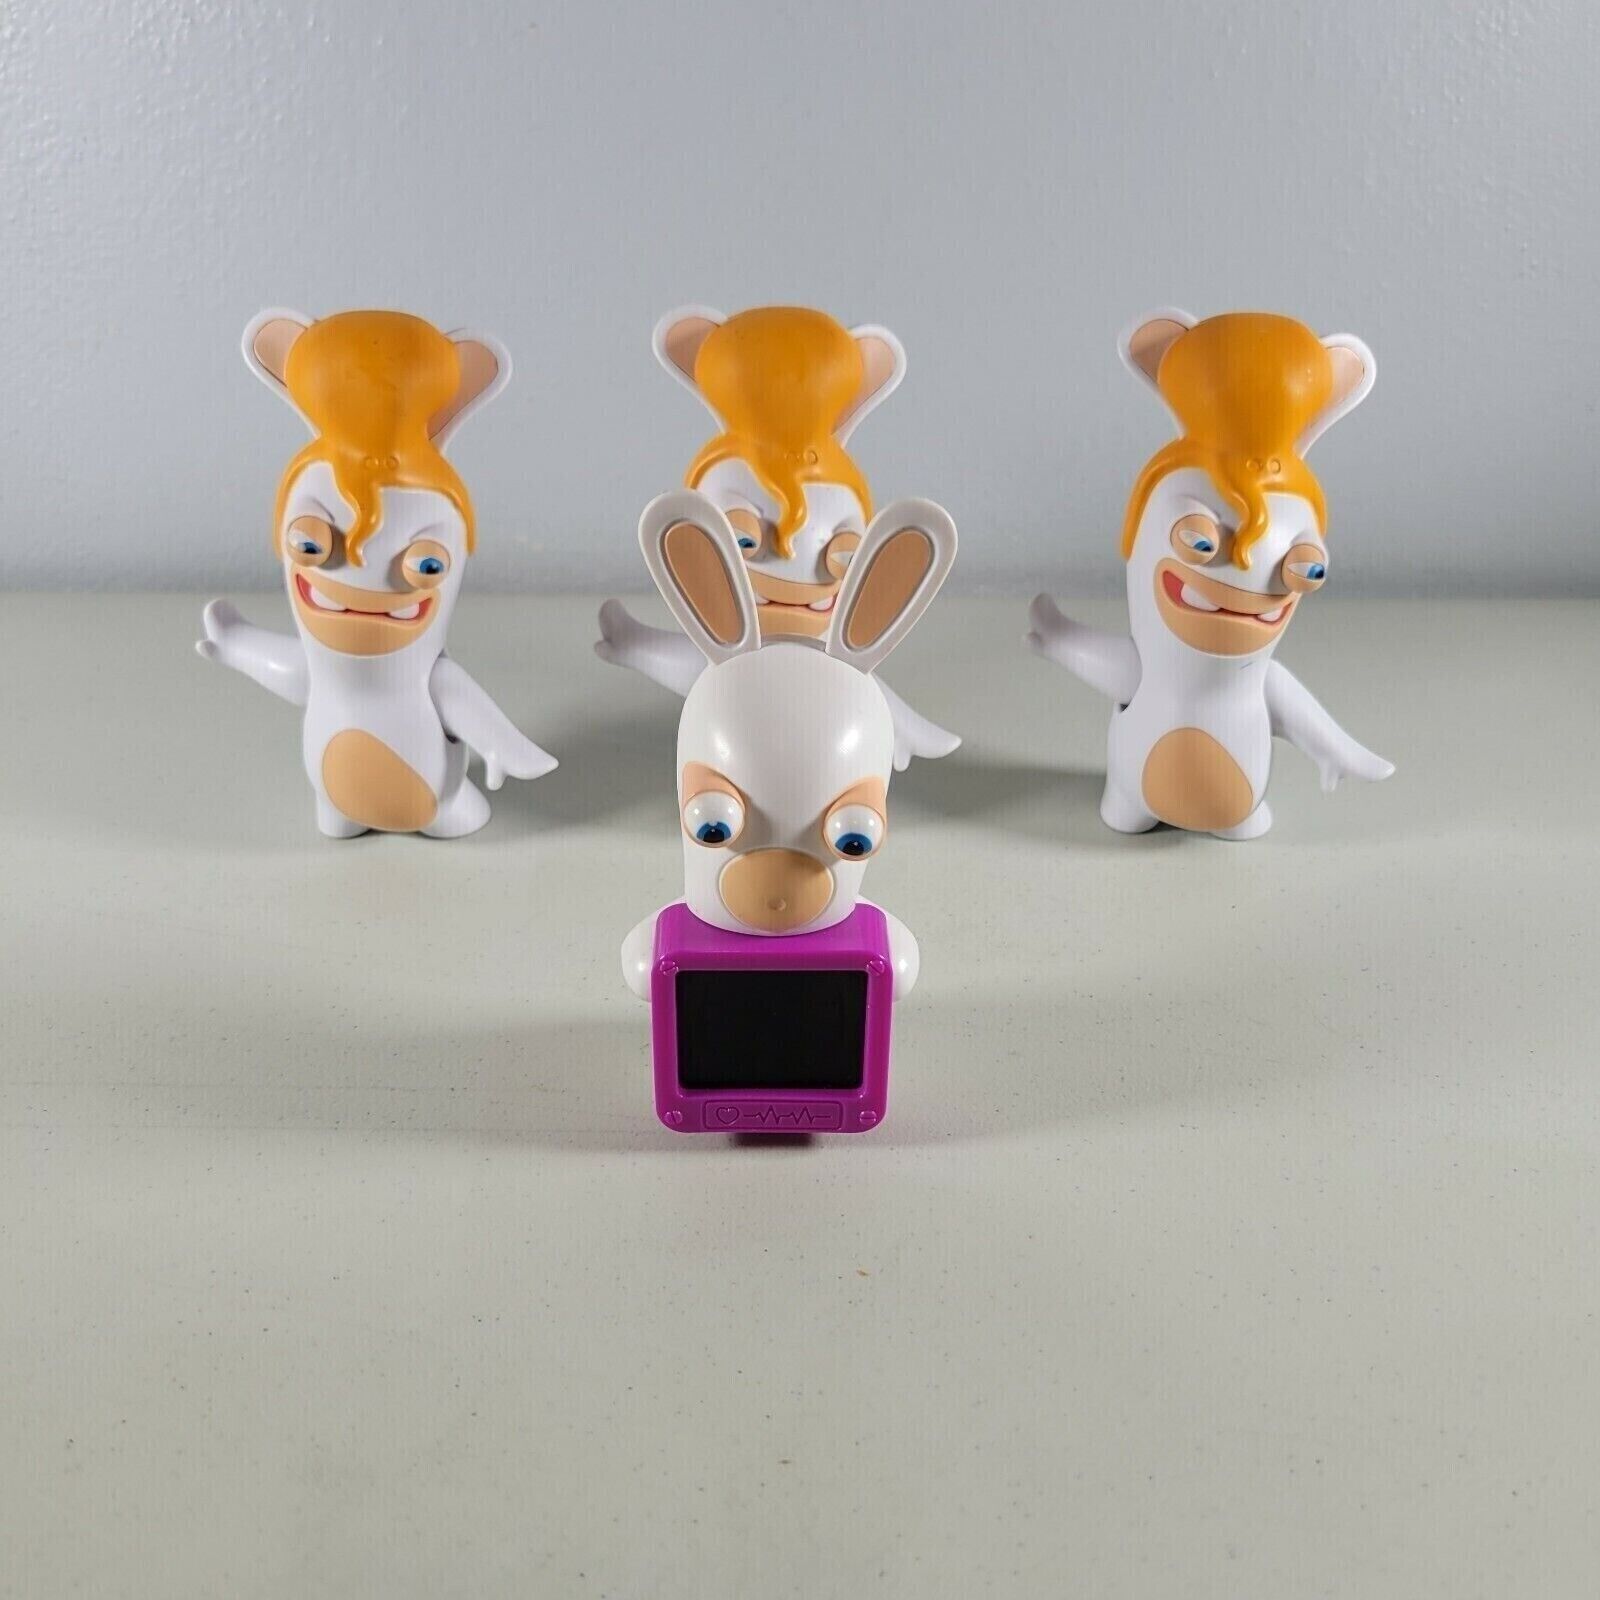 Rabbids Toy Figures Lot of 4 Rabbits Invasion 2019 Burger King As Shown - $9.98